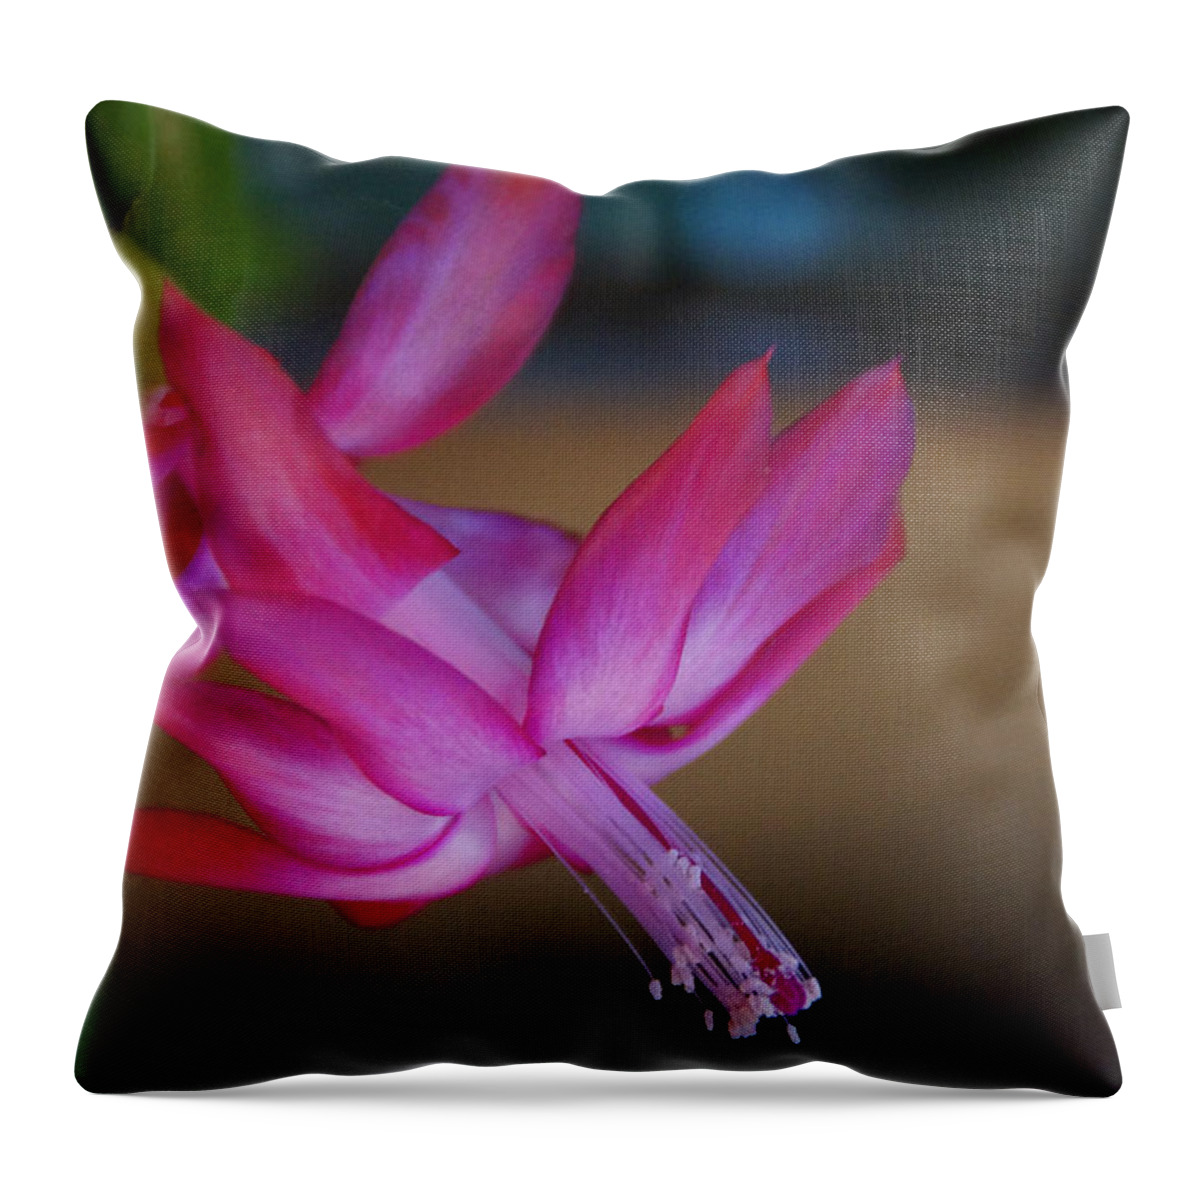 Bloom Throw Pillow featuring the photograph Christmas Cactus Bloom by Mick Anderson